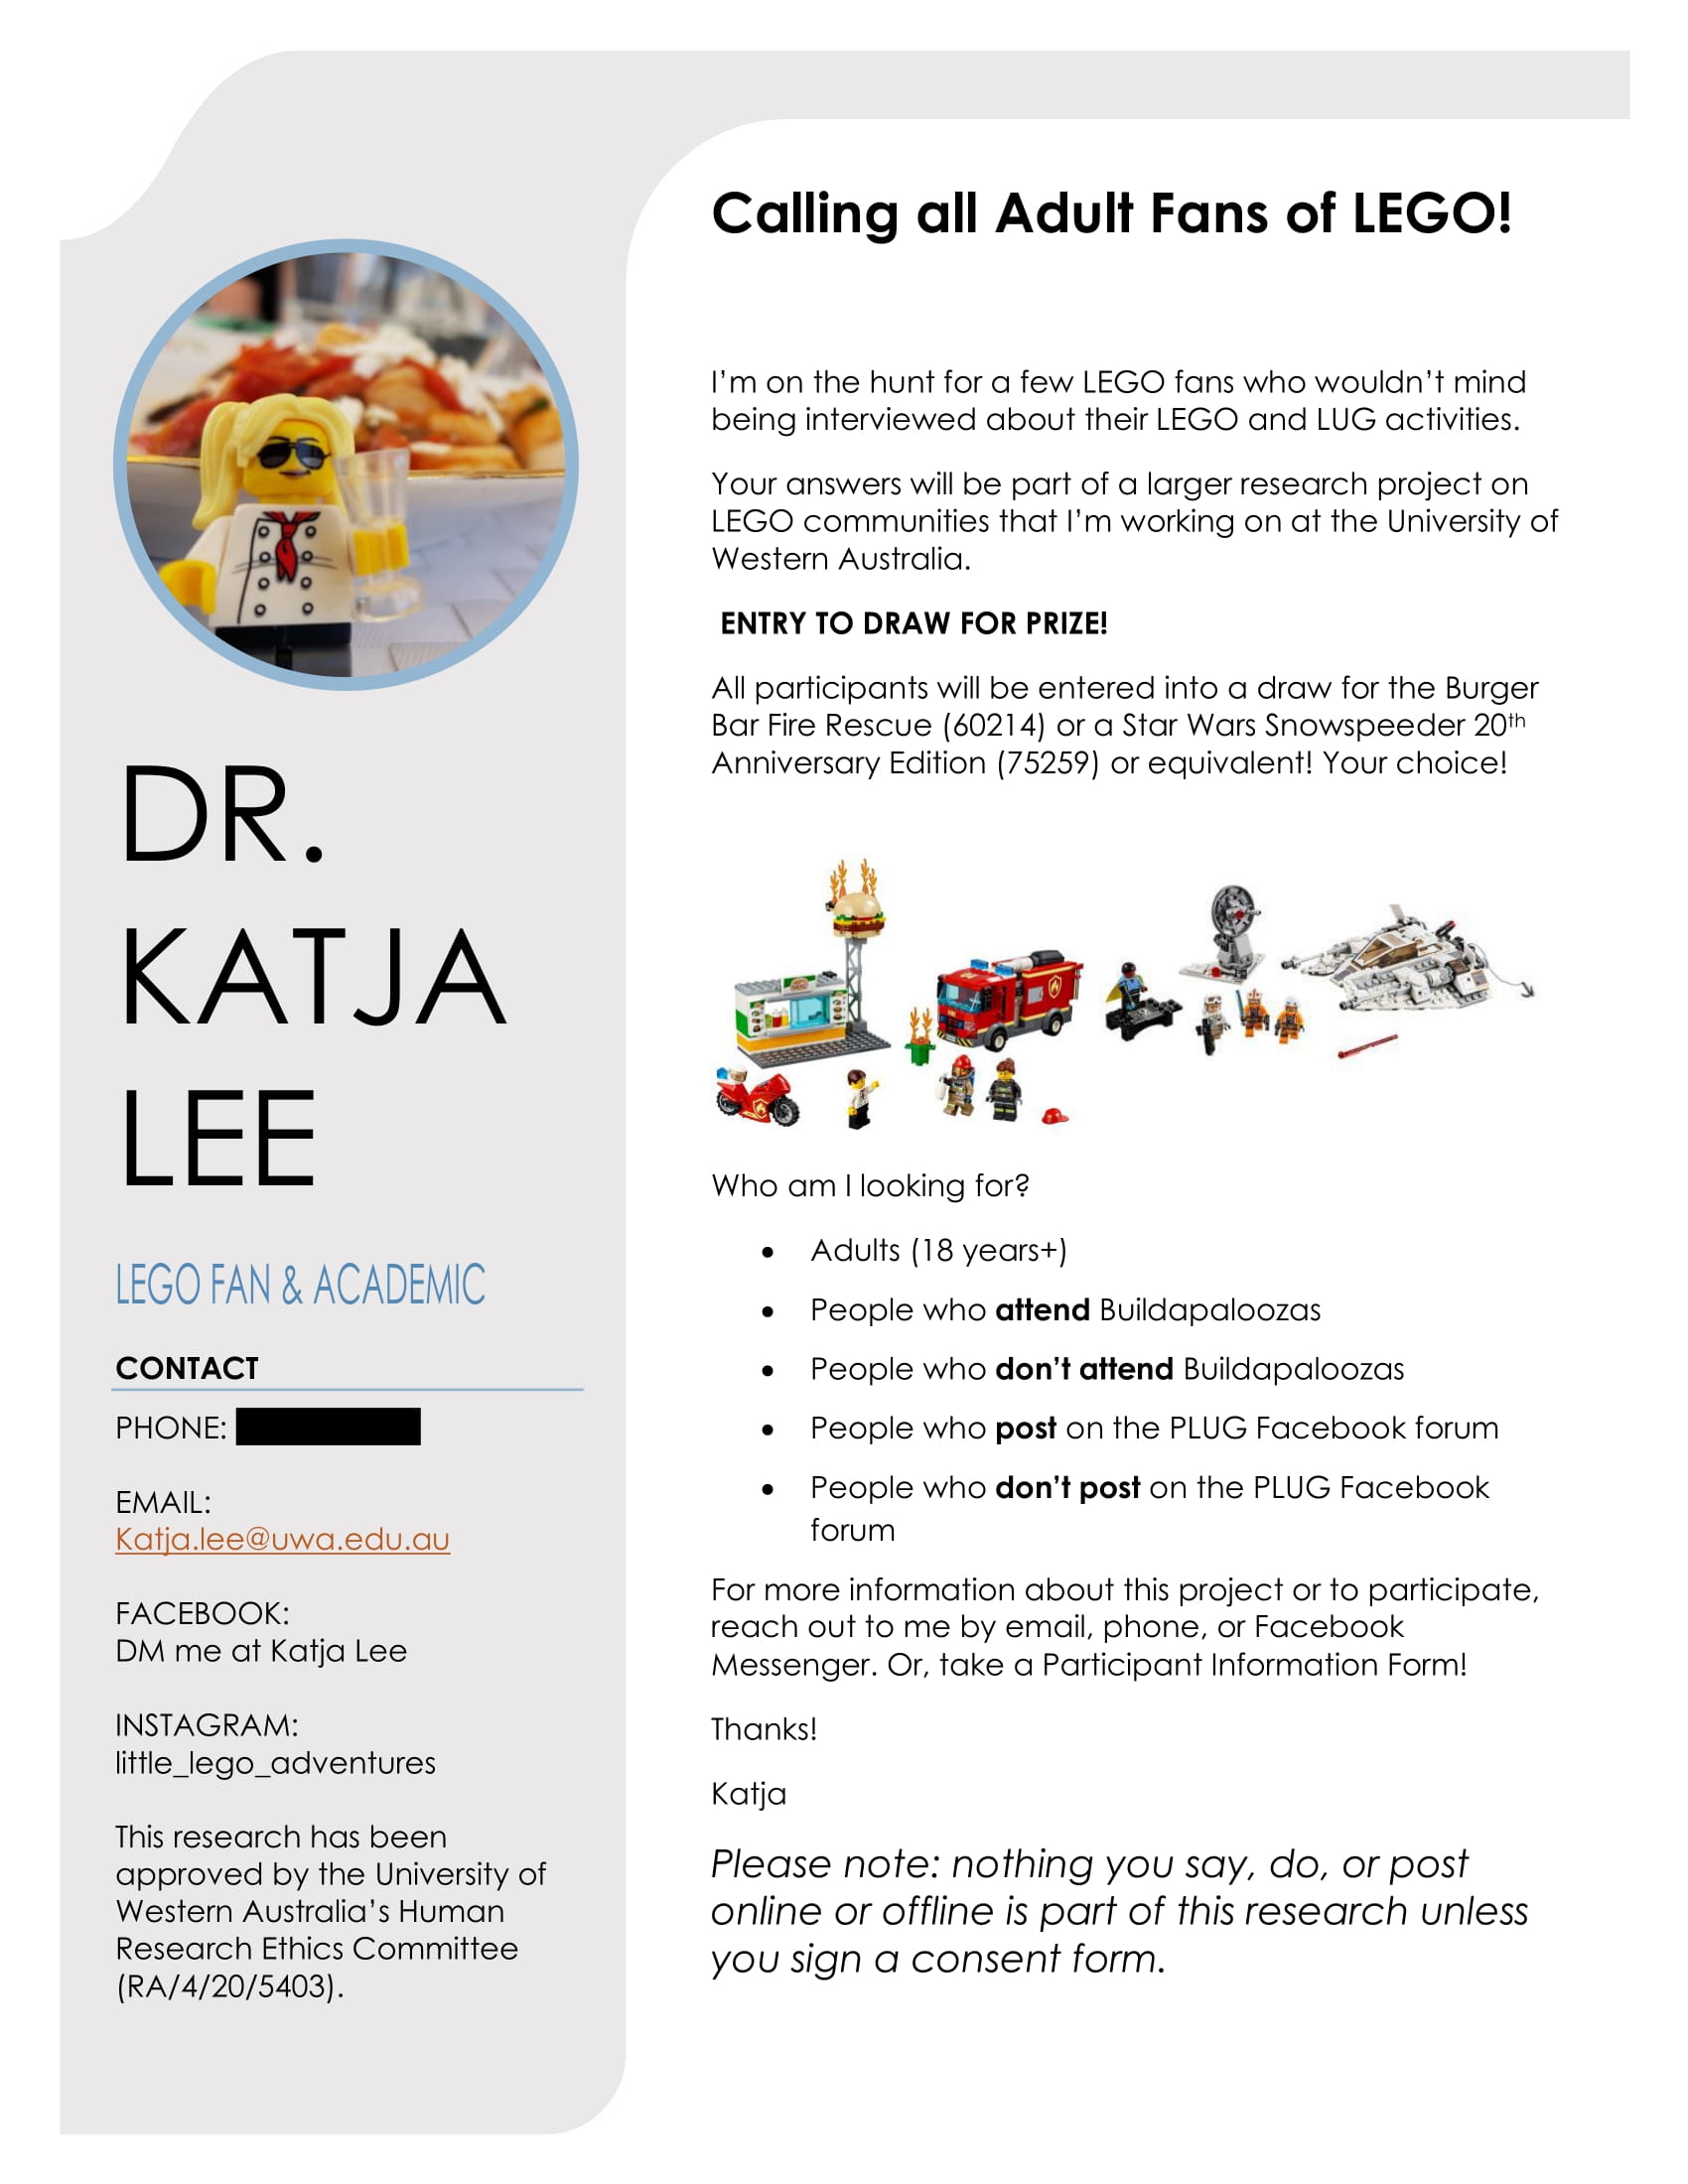 Recruitment poster soliciting participants for study. The poster is headlined: Calling all Adult Fans of LEGO! and in the top left corner in a circle is a Lego minifigure with a ponytail holding a wine glass, representing Dr. Katja Lee.